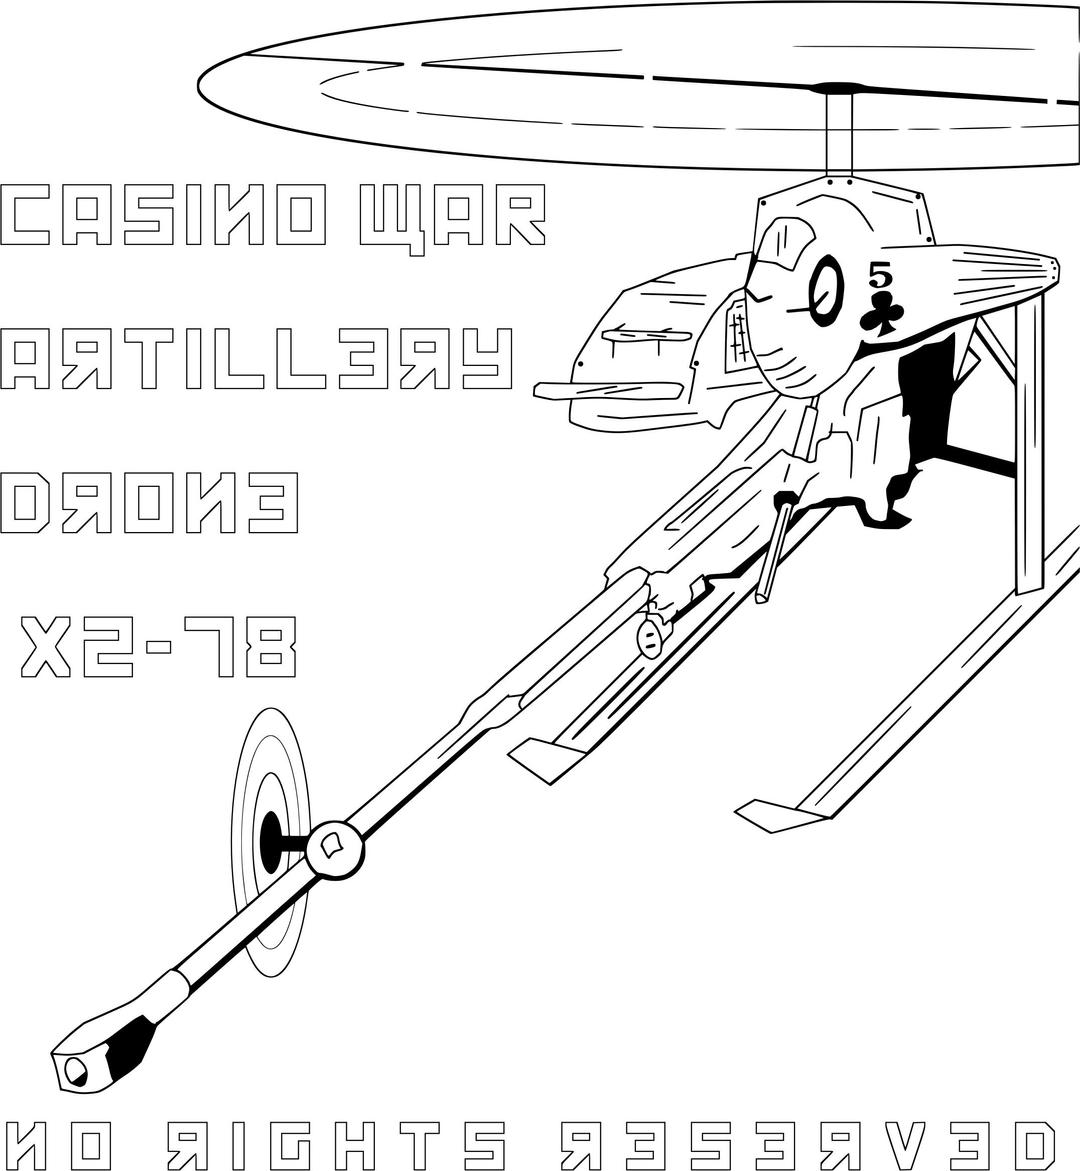 Artillery Drone Coloring for Grown Ups png transparent